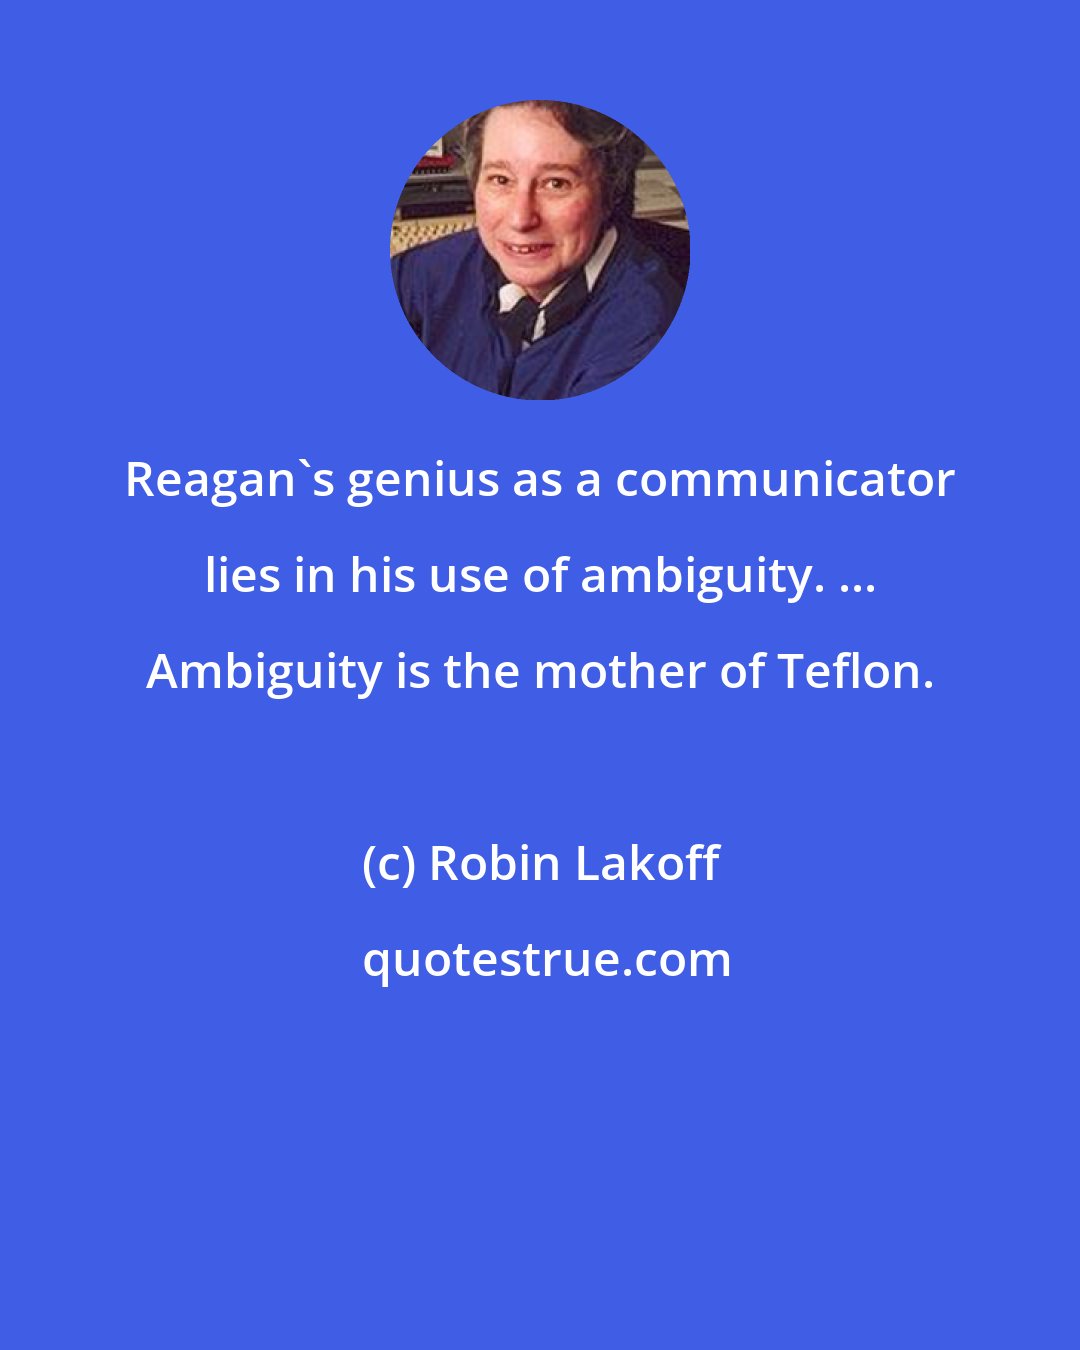 Robin Lakoff: Reagan's genius as a communicator lies in his use of ambiguity. ... Ambiguity is the mother of Teflon.